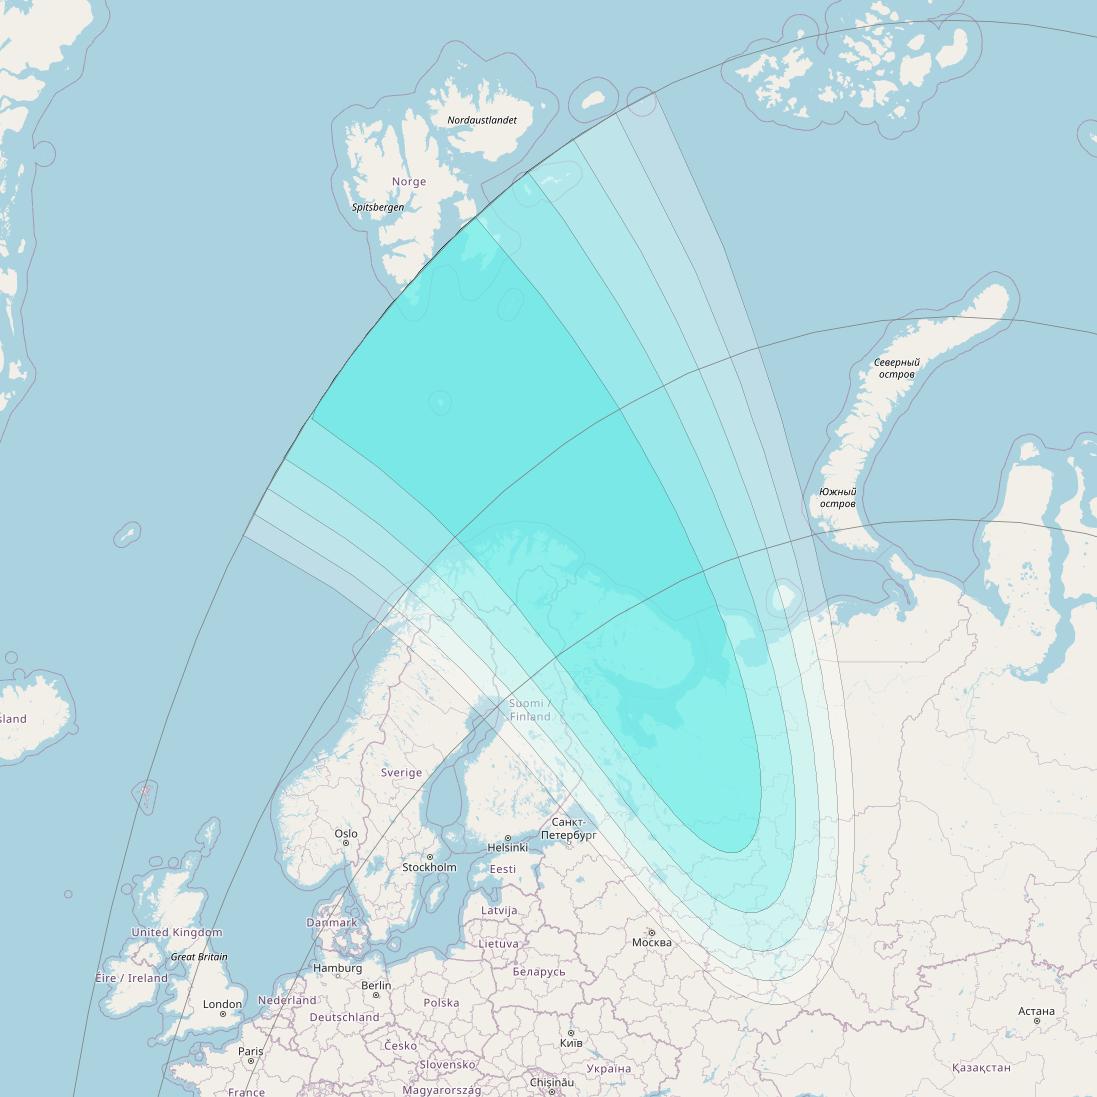 Inmarsat-4F2 at 64° E downlink L-band S082 User Spot beam coverage map